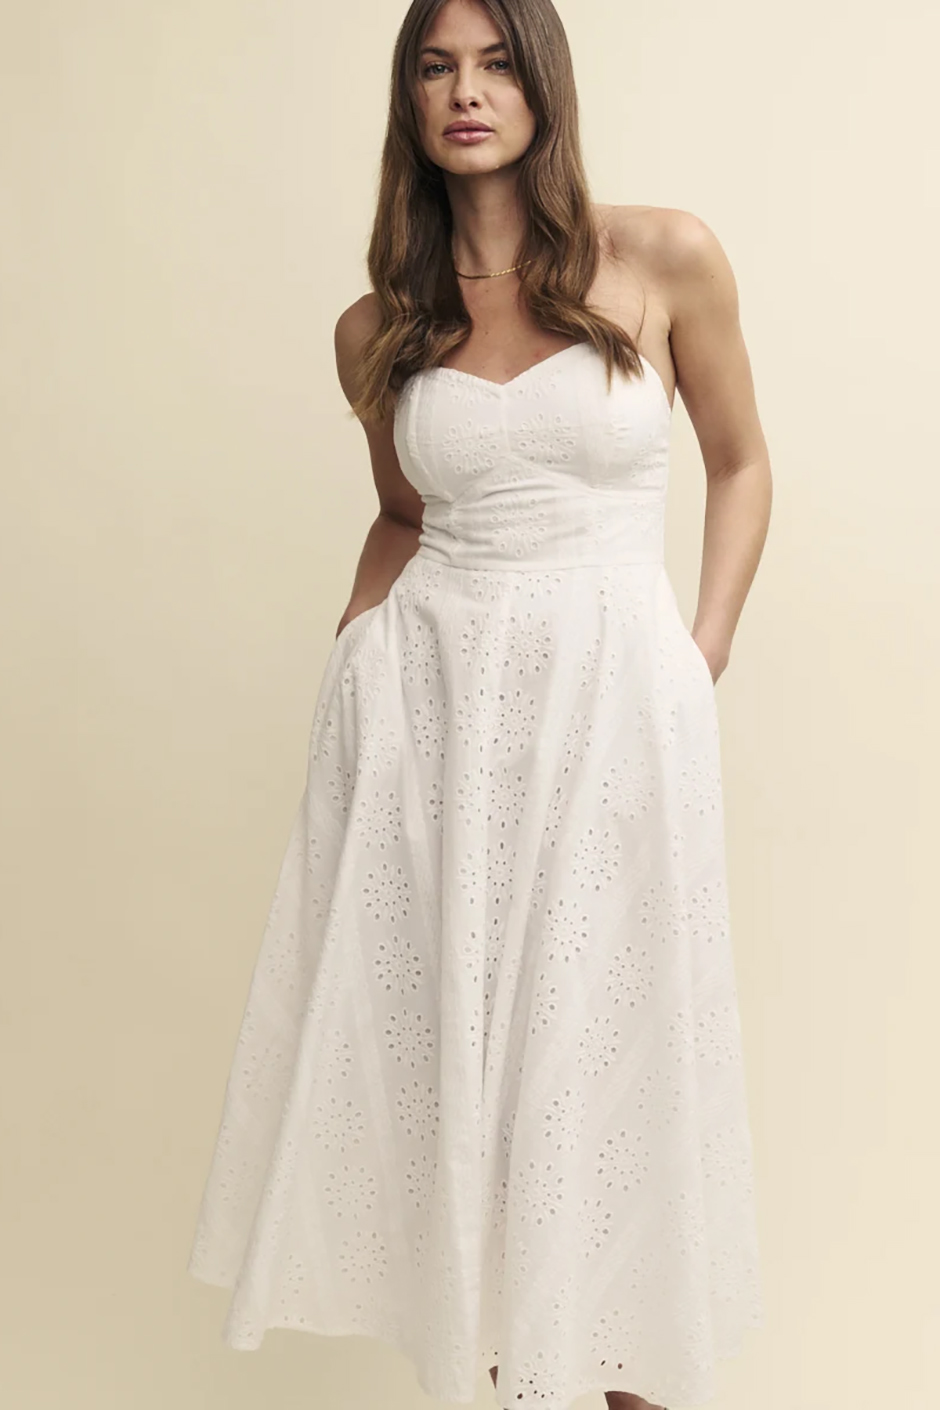 White broderie bandeau midaxi wedding dress with pockets from Nobody's Child